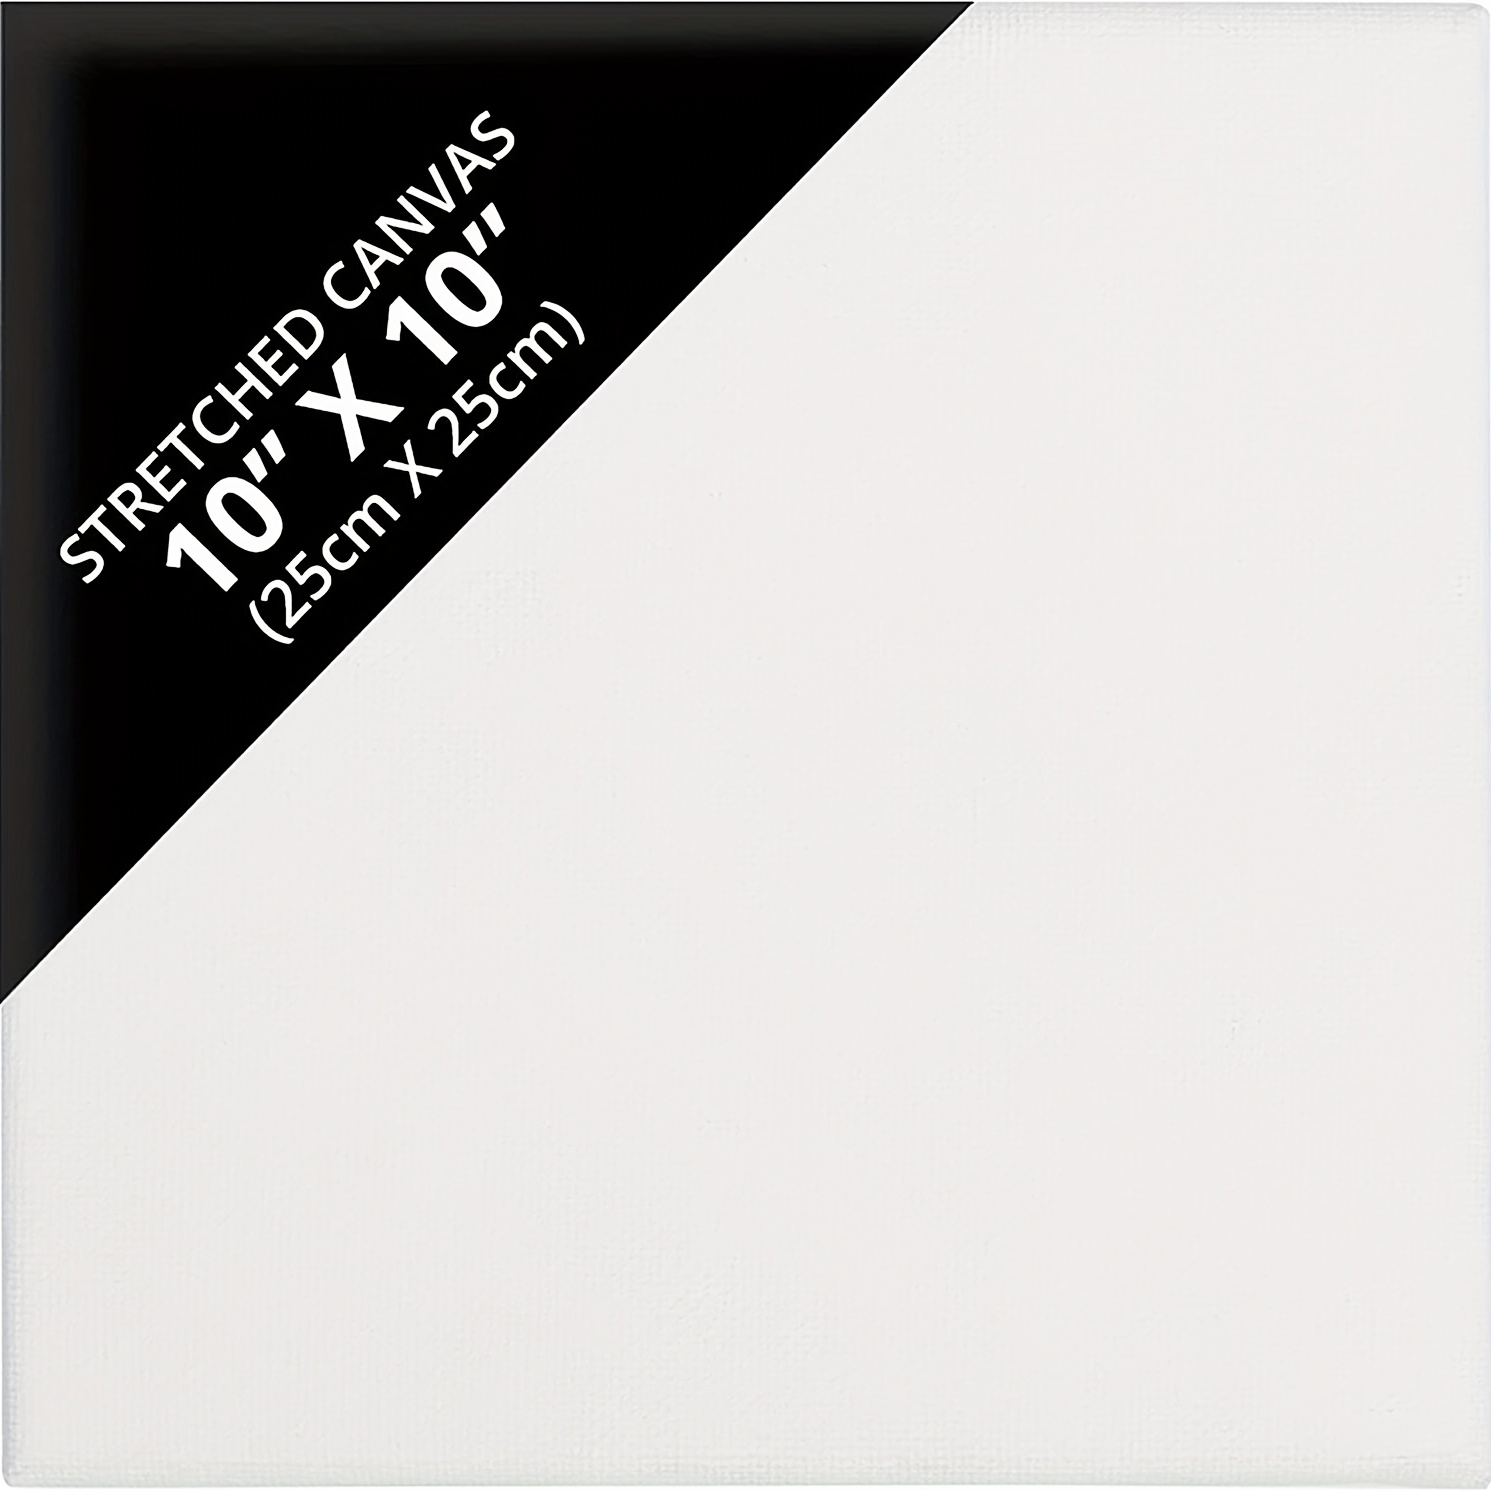 Painting Canvas 8x8 Inches, Pack Of 1 ,100% Cotton Acid Free Canvases For  Painting, White Blank Flat Canvas Boards For Acrylic, Oil, Watercolor & Past